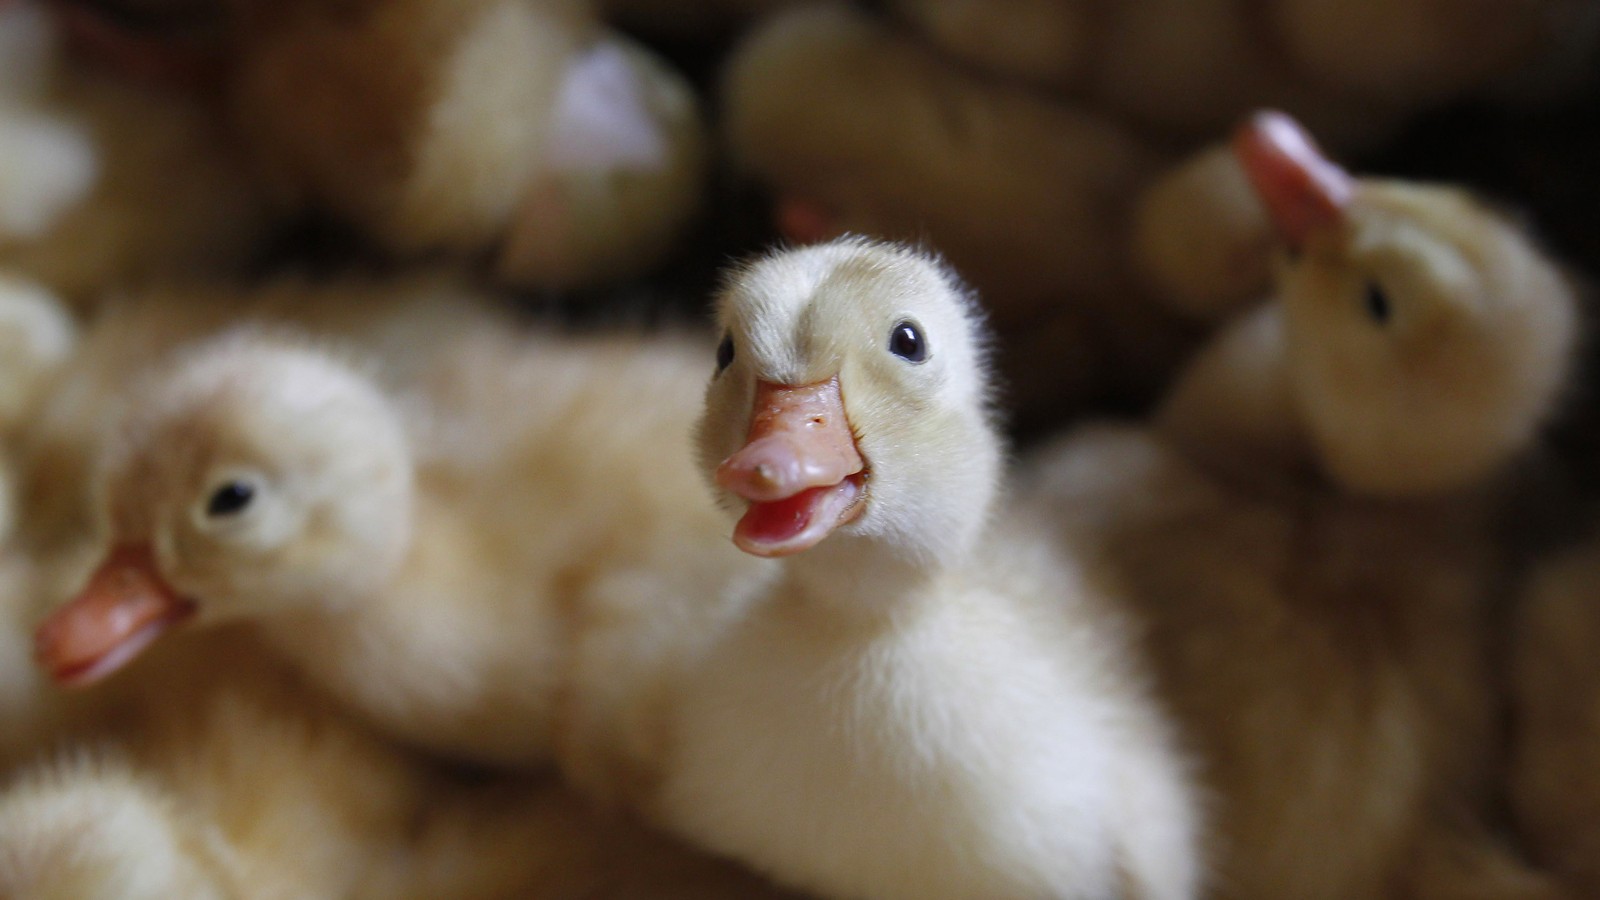 Adorable Ducklings Have Abstract Thoughts - The Atlantic